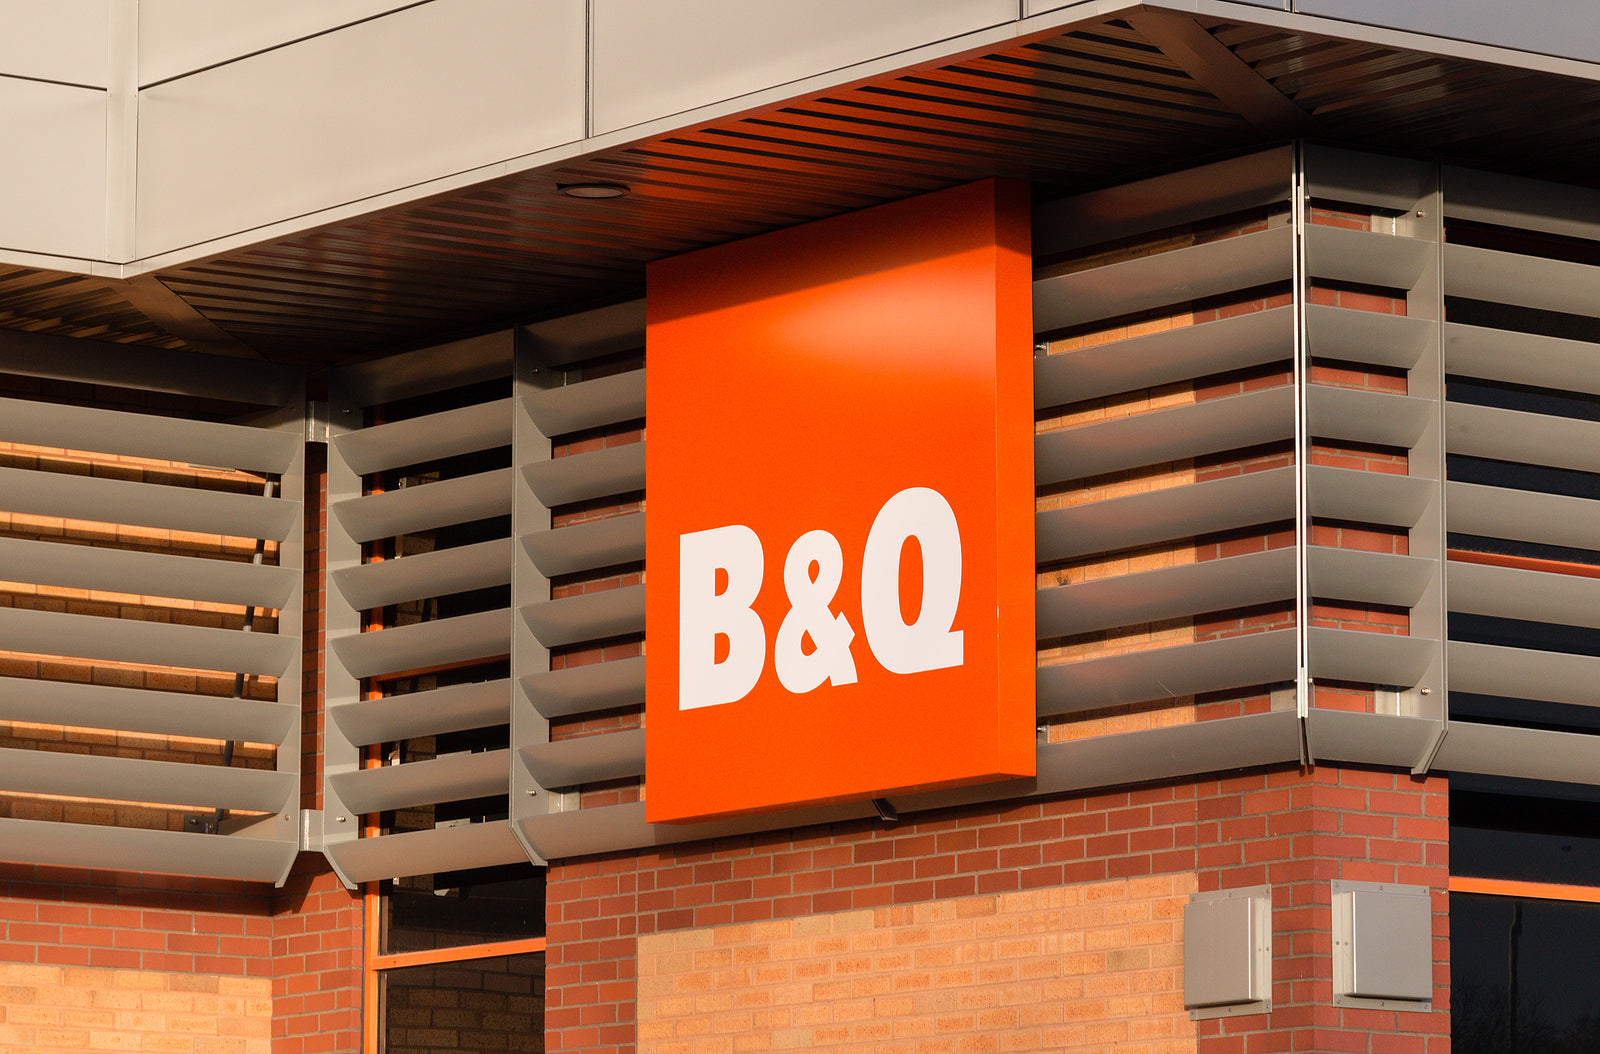 [UK] B&Q becomes highest paying retailer with new hourly pay rise